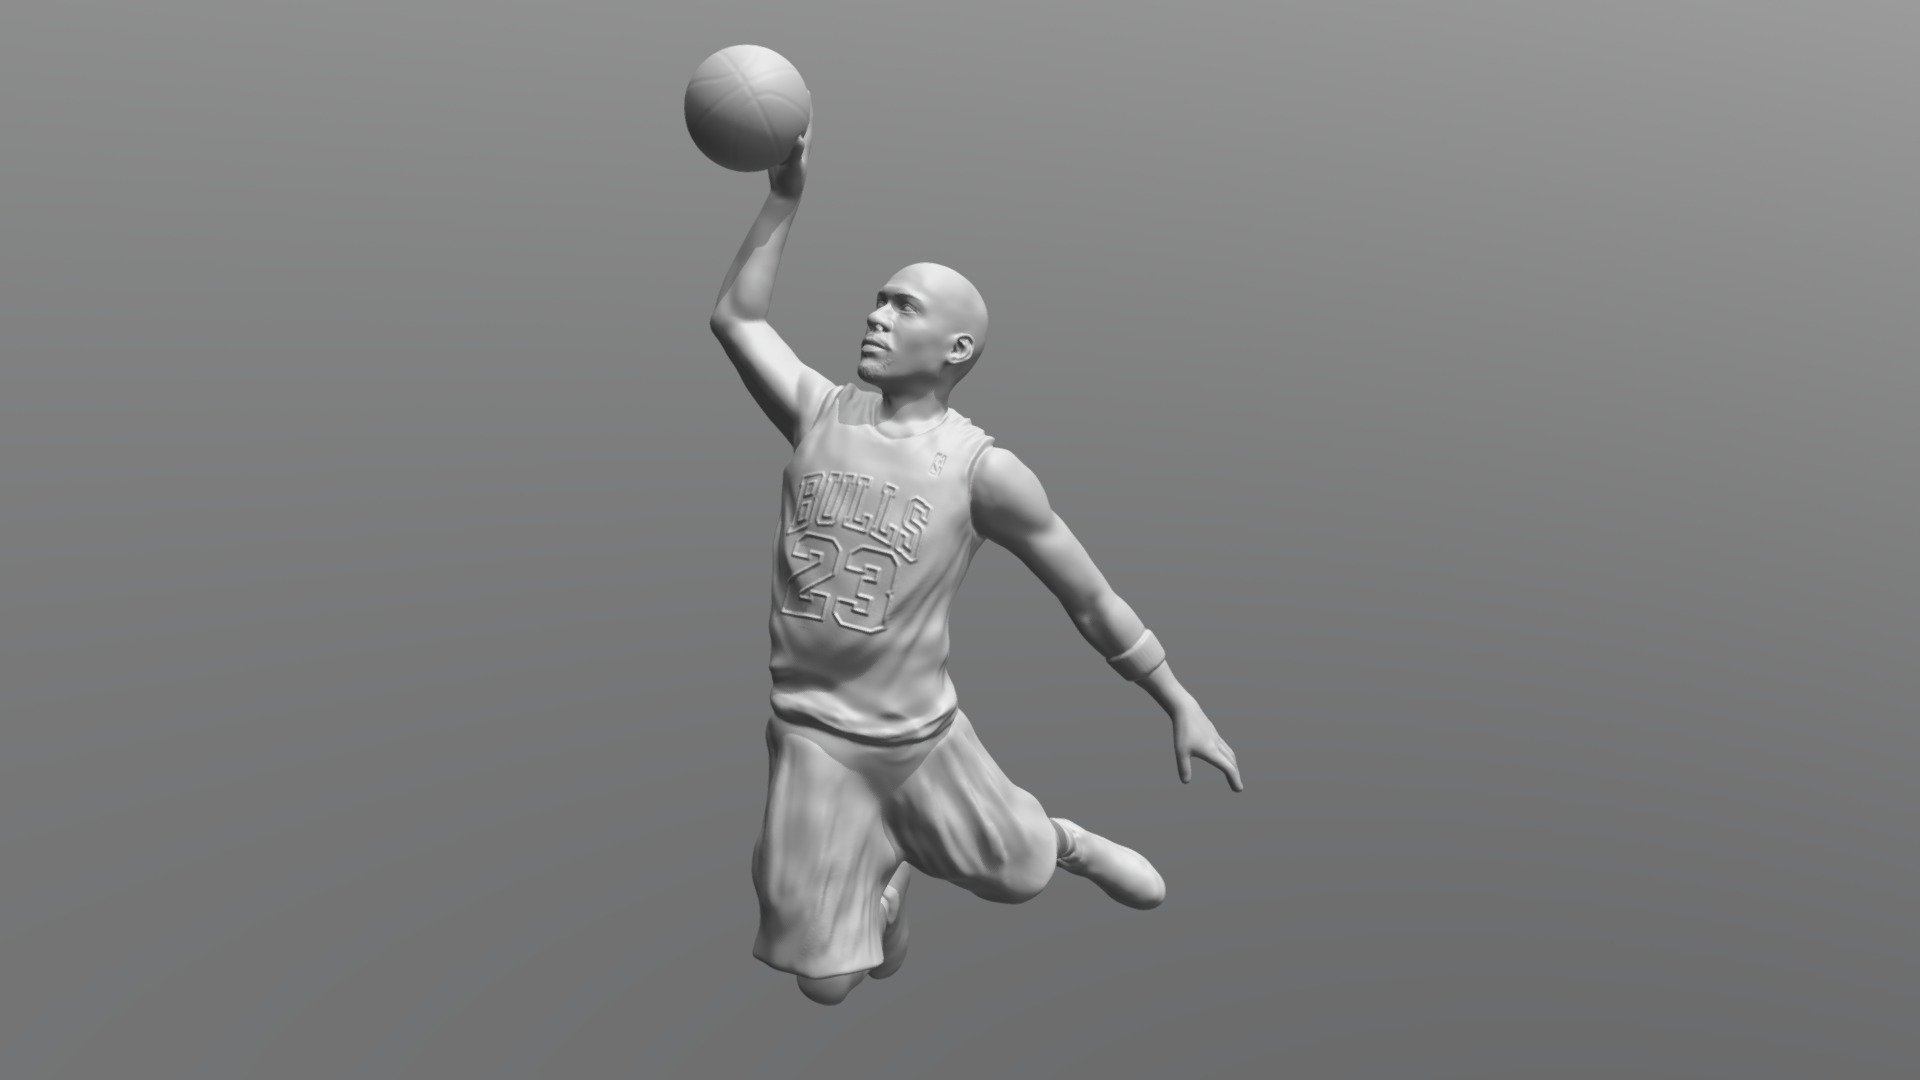 Here is Michael Jordan 3D model ready for 3D printing. The model is not scaled, so you will have to adjust this to the size you want. You will also have to mount printed figurine to some kind of base to ensure proper standing. 
Rar file contains stl. 
The model was created in ZBrush.

If you have any questions please don't hesitate to contact me. I will respond you ASAP. 
I encourage you to check my other celebrity 3D models 3d model